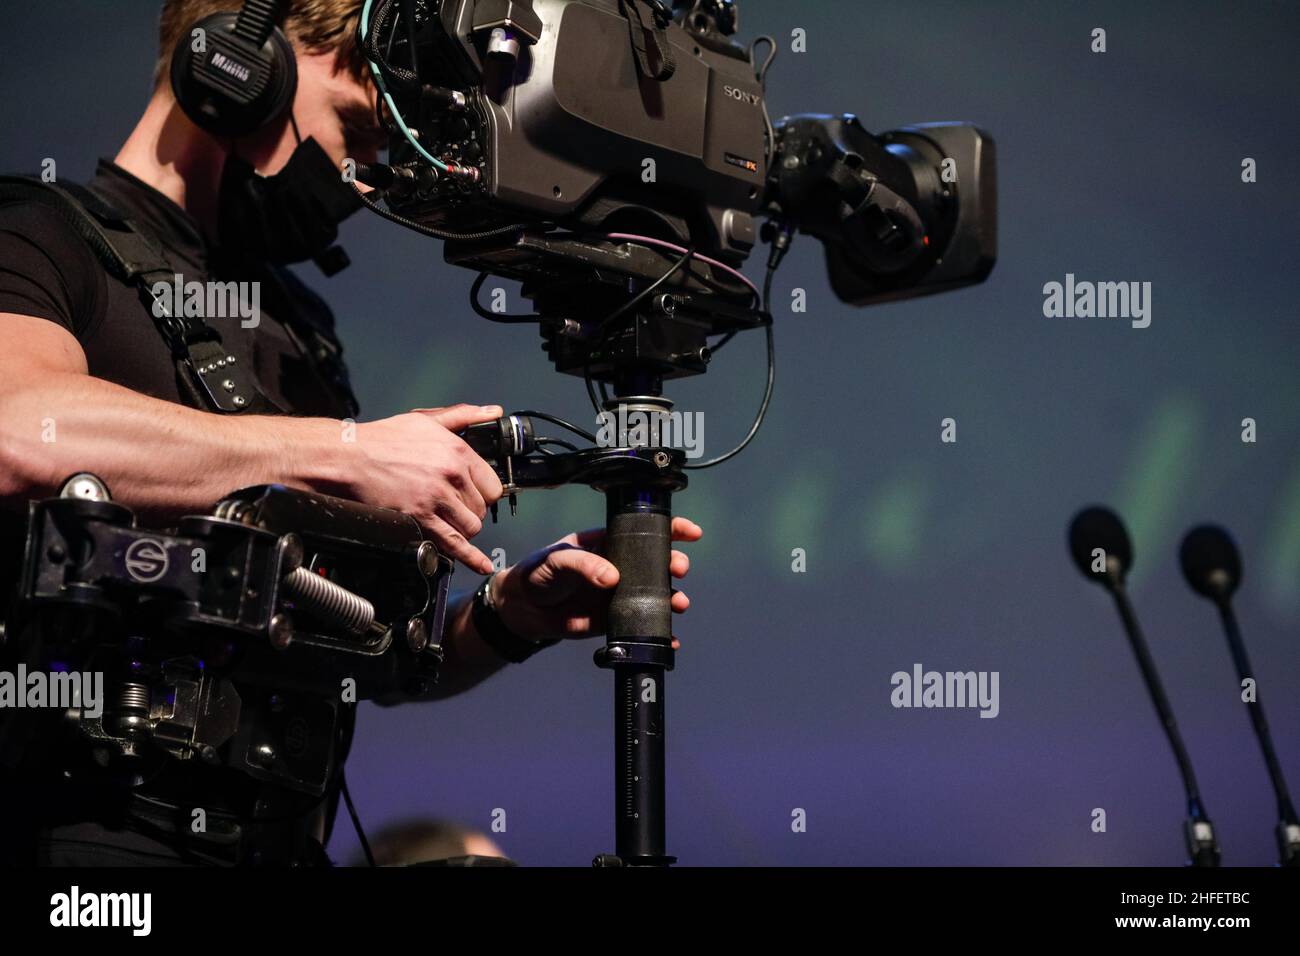 Bucharest, Romania - January 15, 2022: Professional steadicam (gimbal) operator filming a classical music concert. Stock Photo